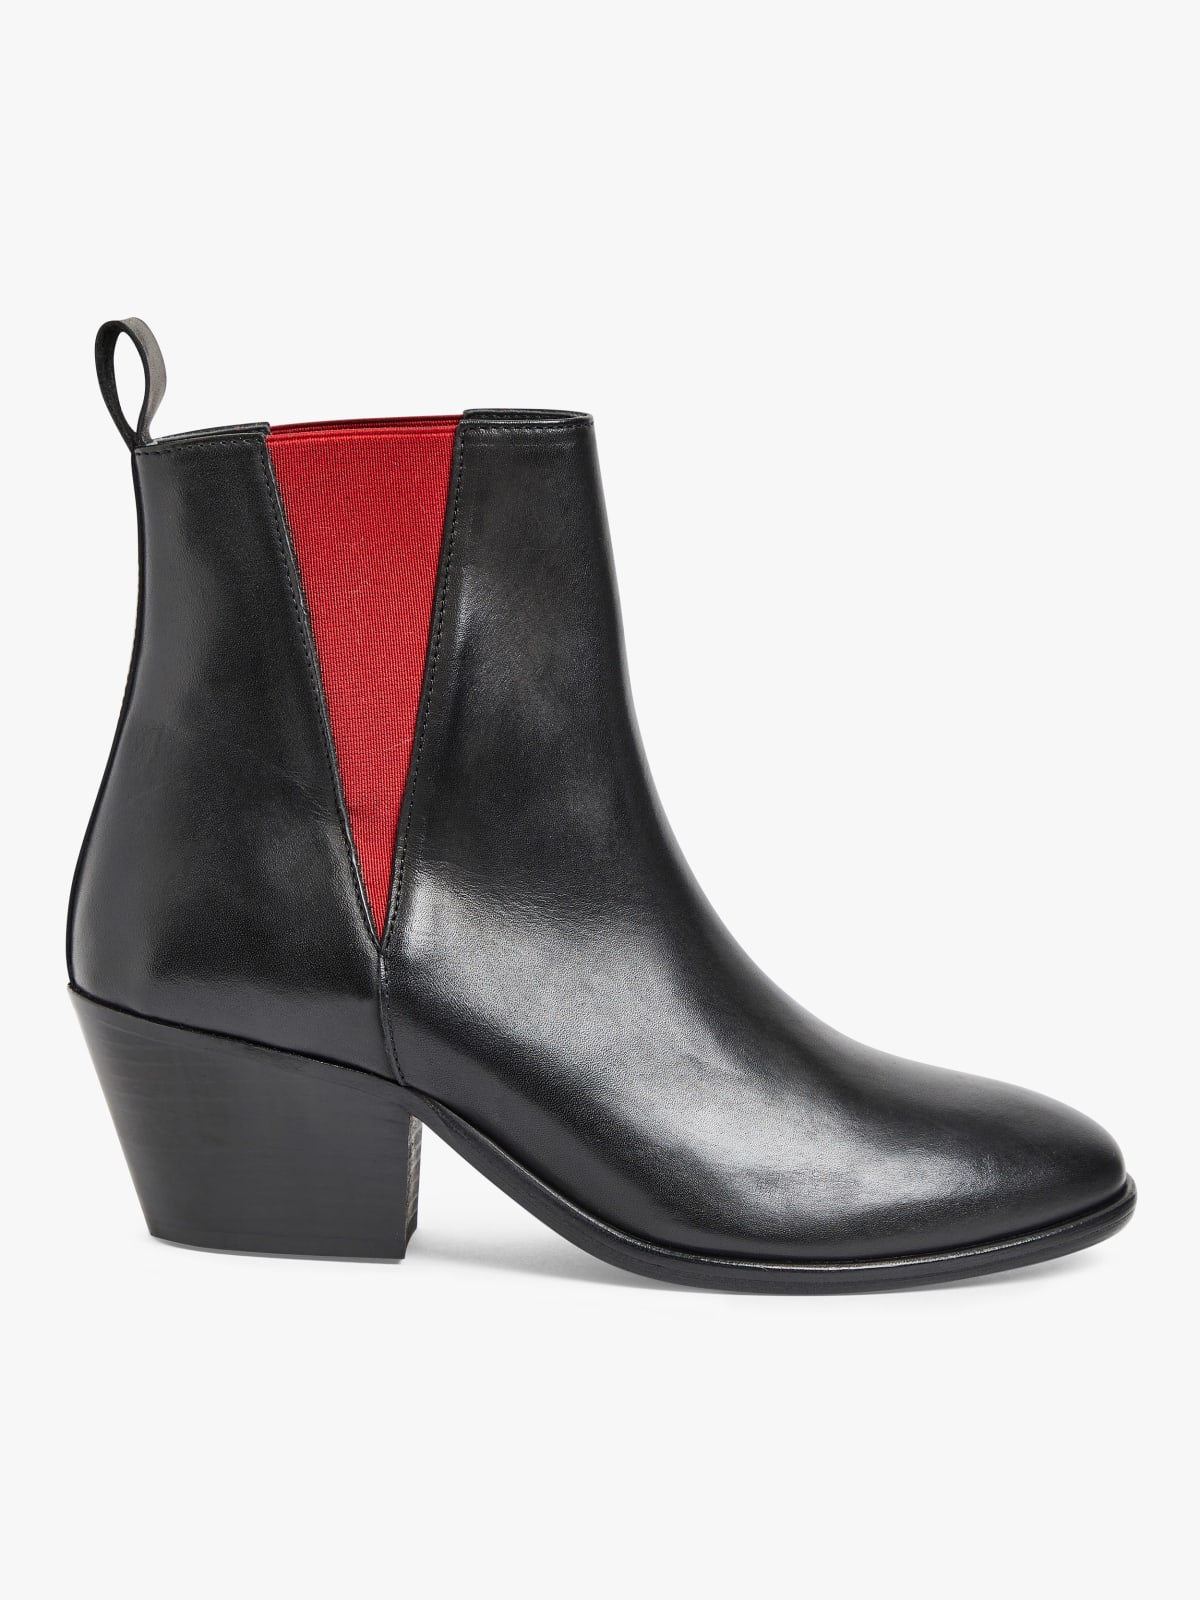 black and red Victoria rock boots